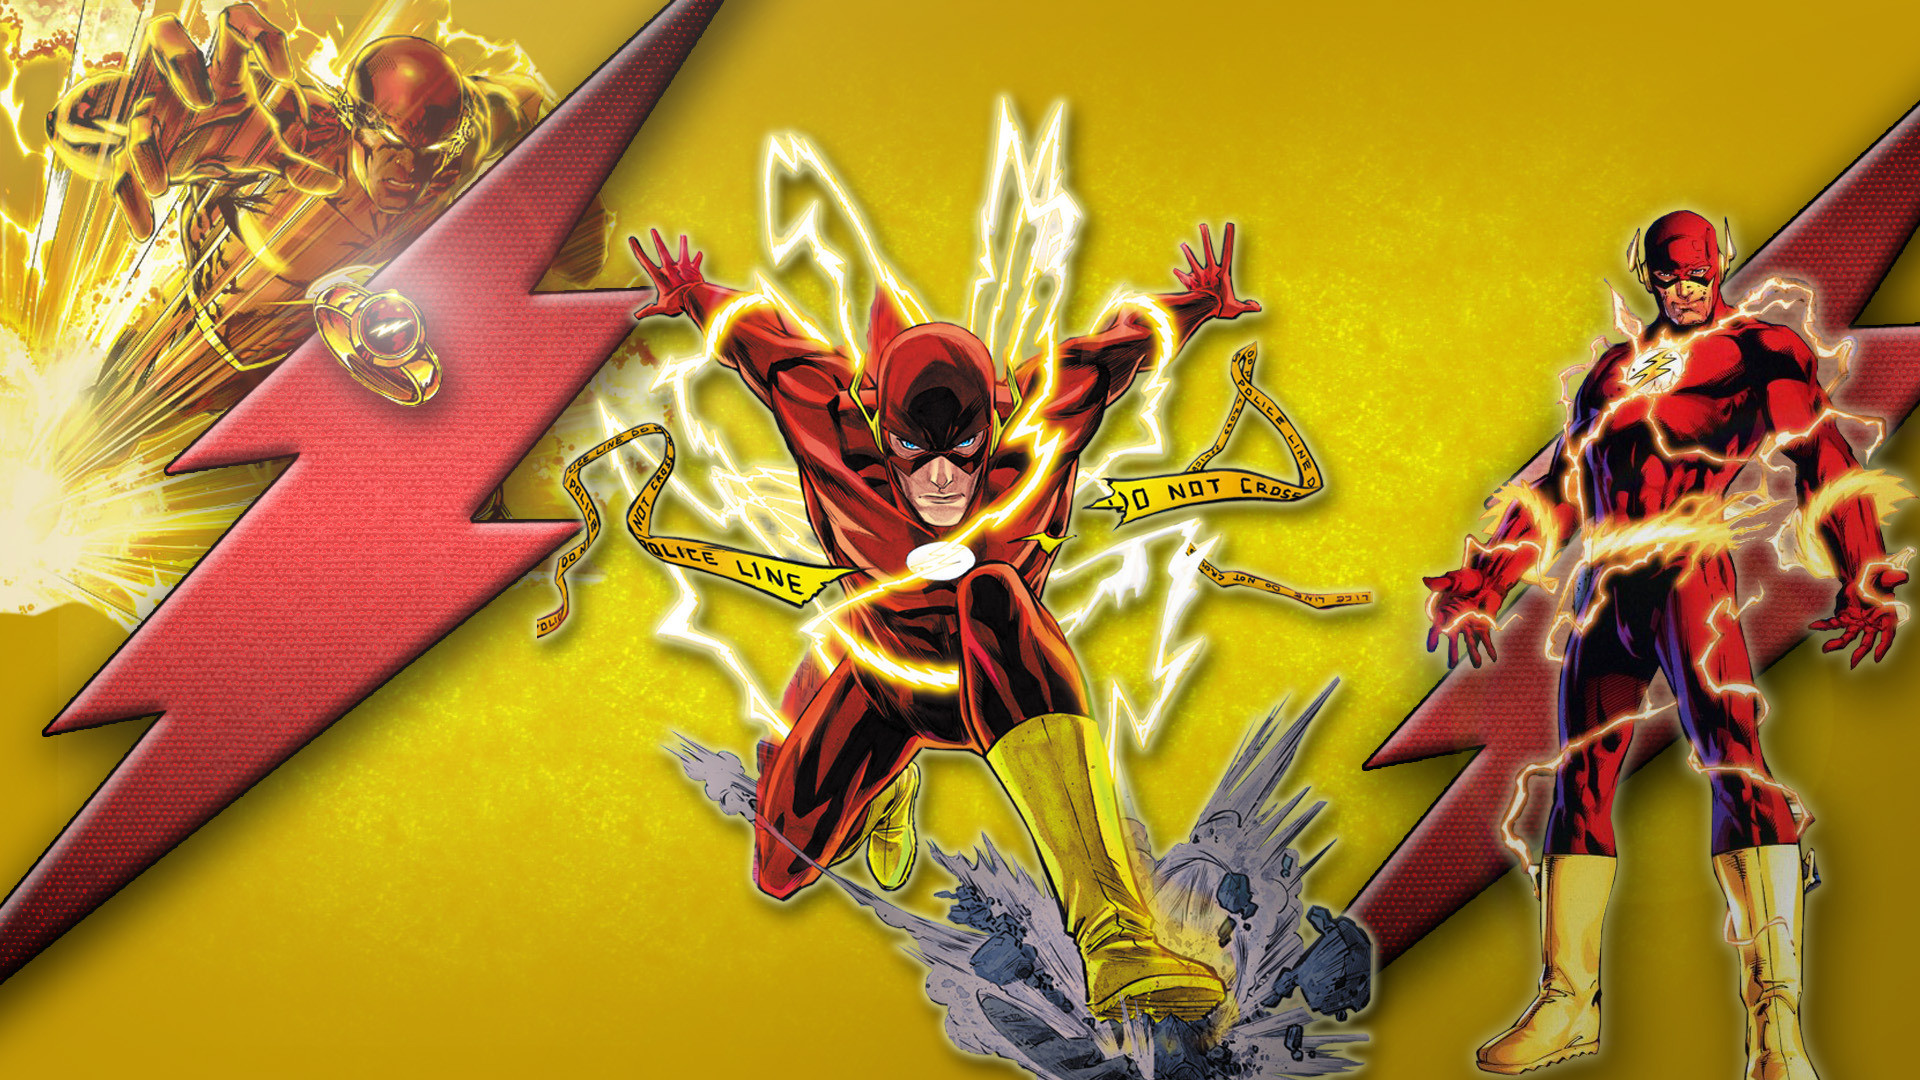 1920x1080 Flash New 52 Wallpaper Flash one and a new 52 wonder